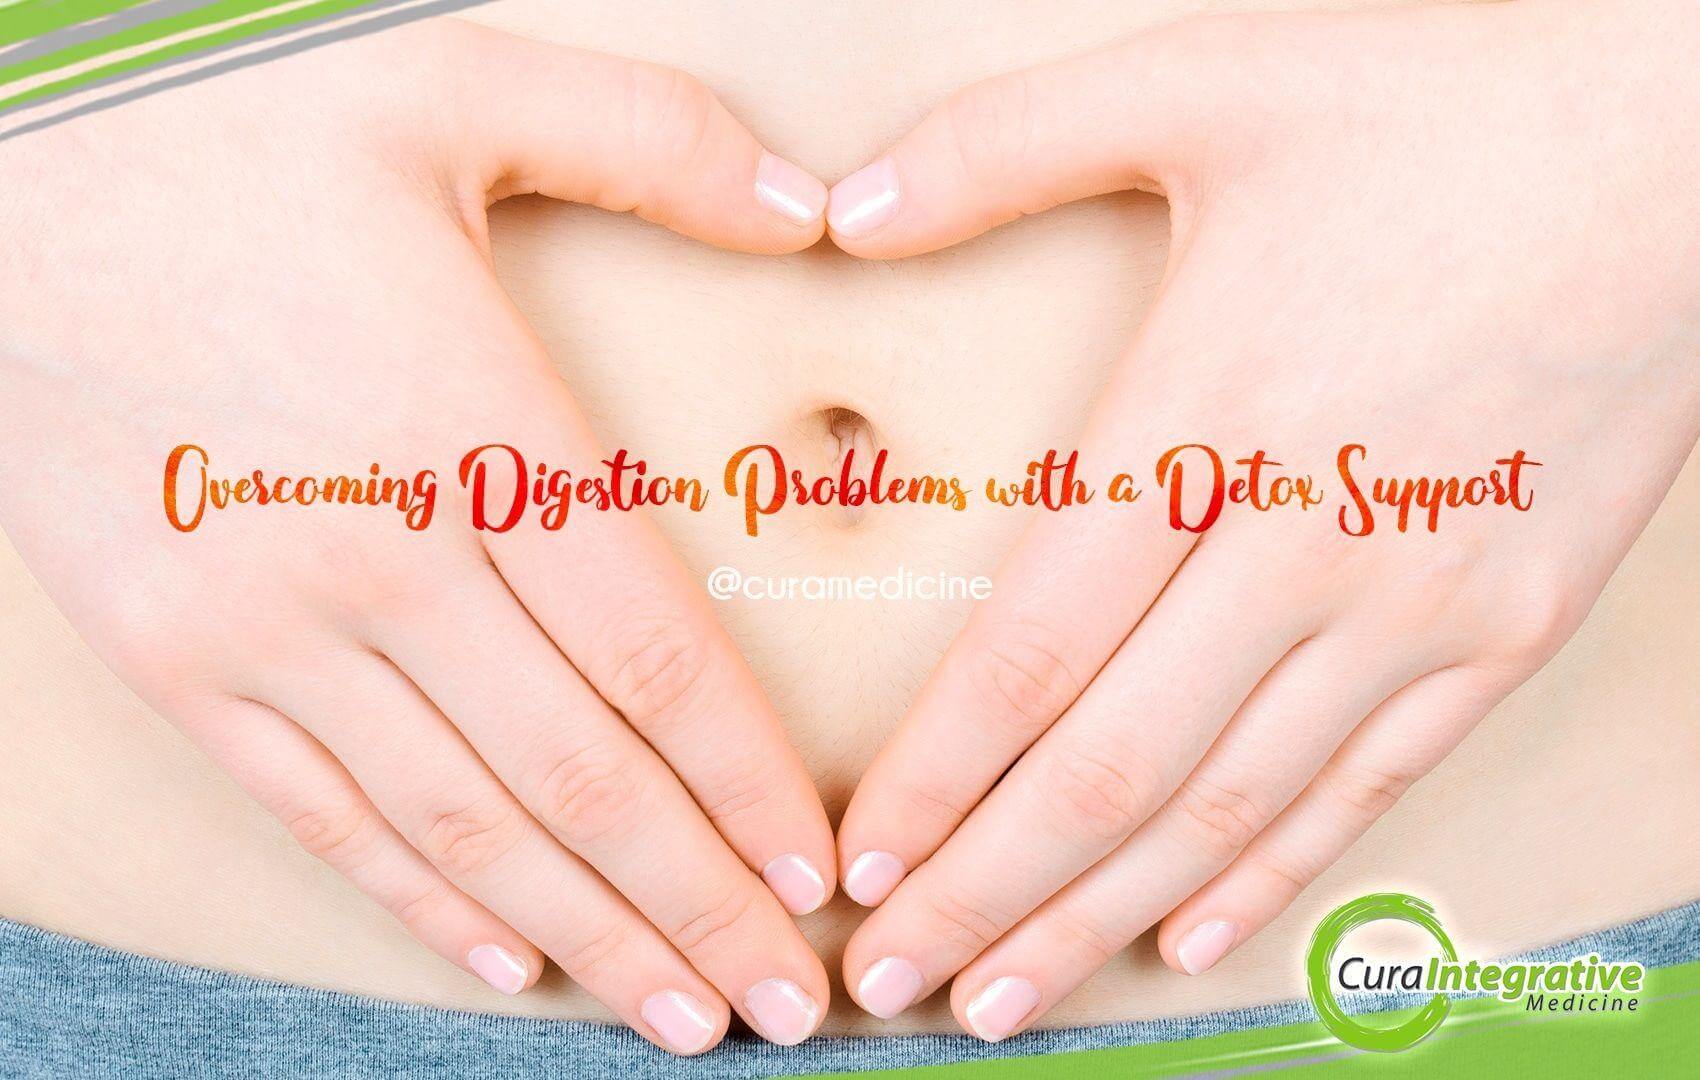 Overcoming Digestion Problems with a Detox Support